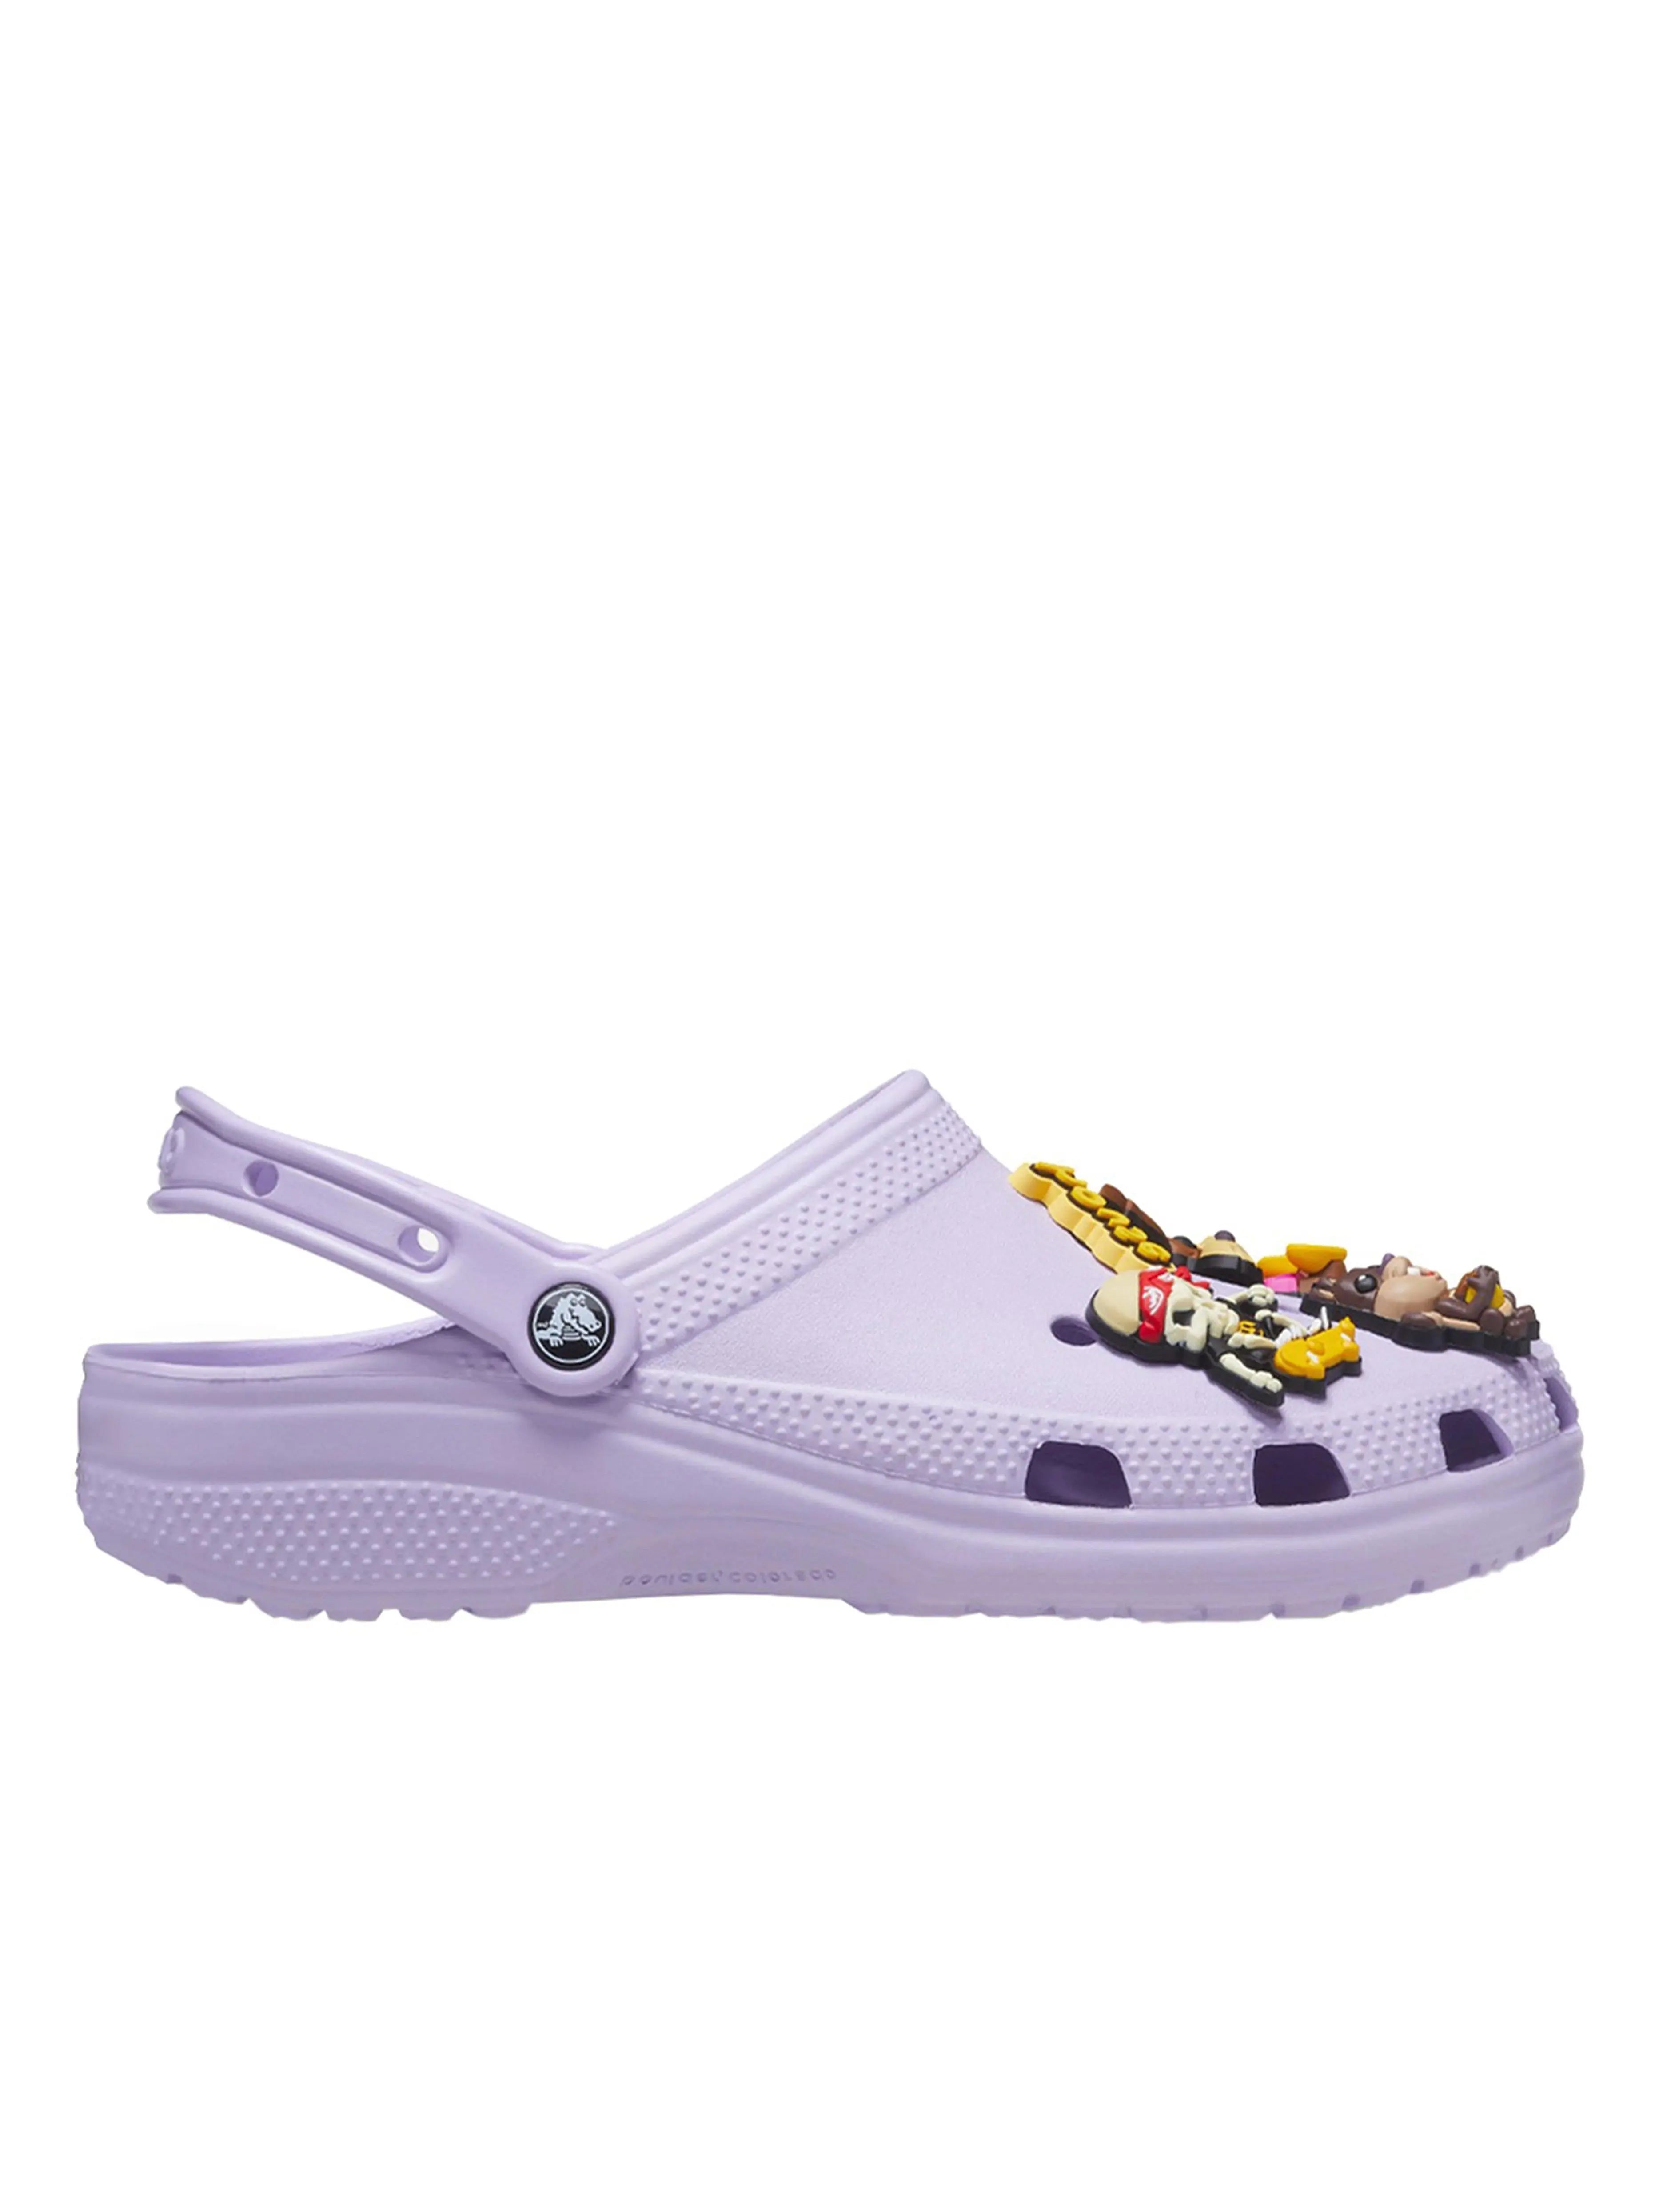 Size 11 Brand New Justin Bieber w/ drew house 2 Lavender Crocs Classic Clog  - clothing & accessories - by owner 